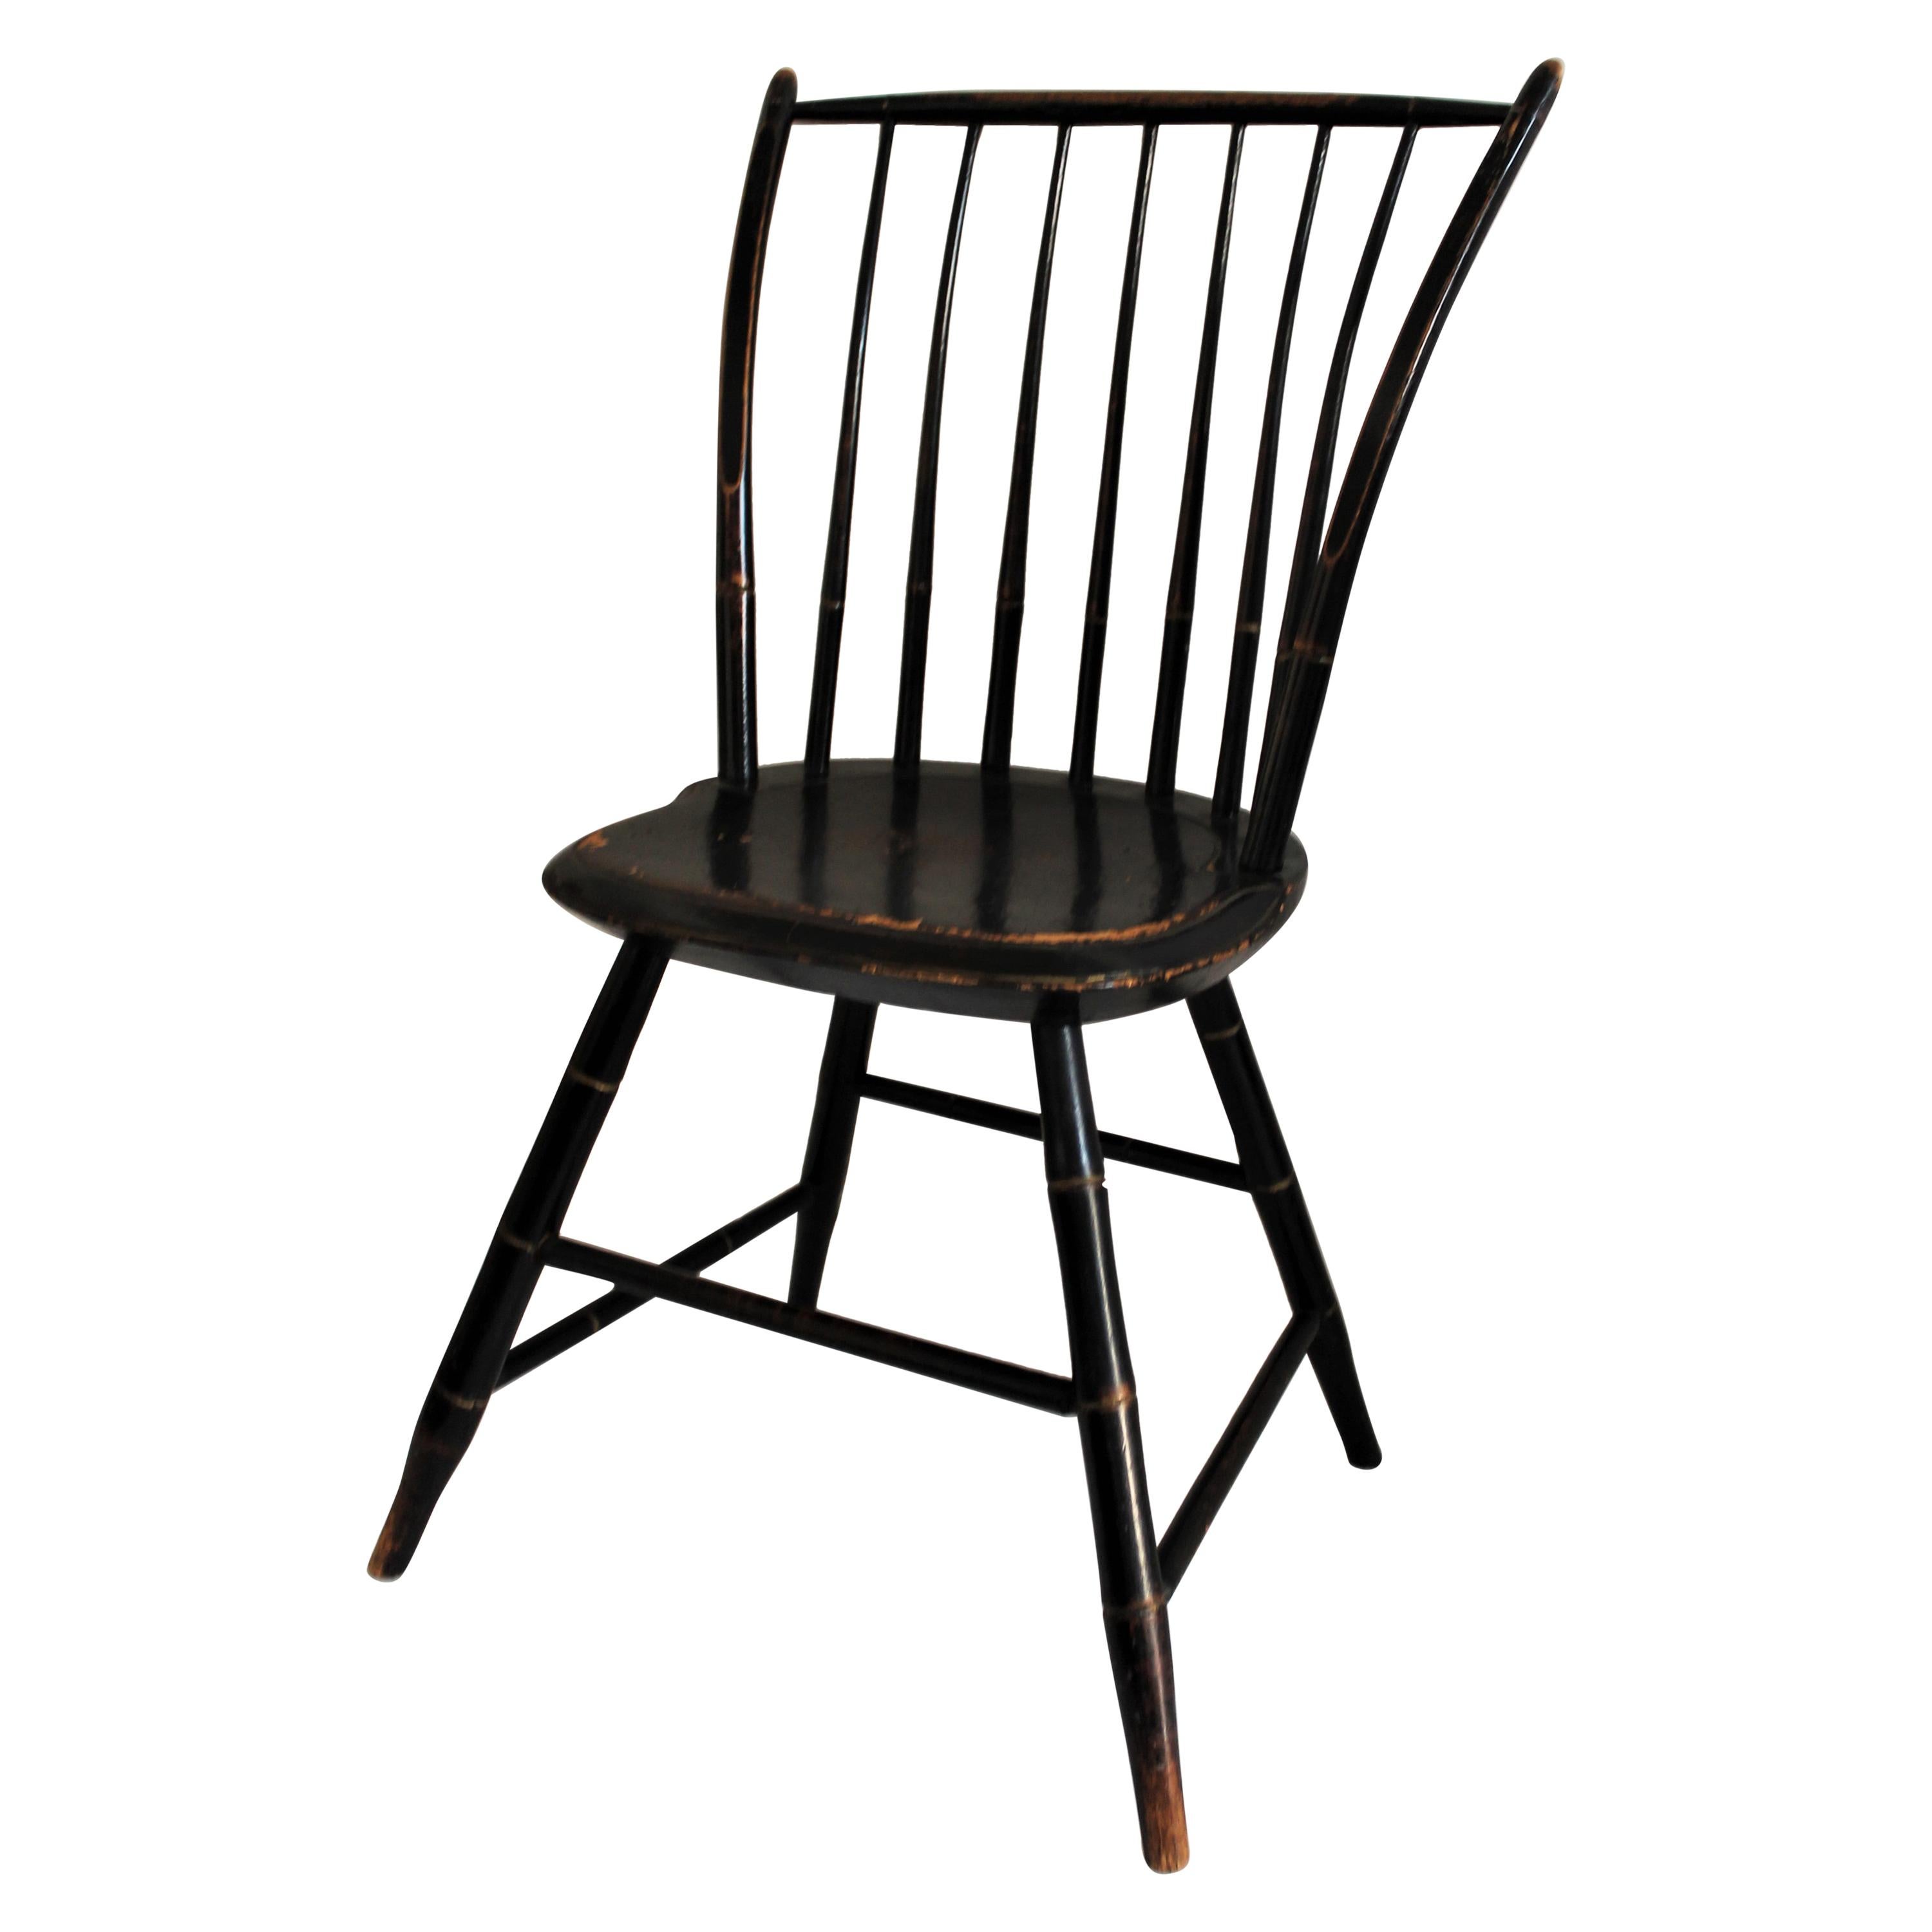 Early 19th Century Windsor Chair in Original Black Paint